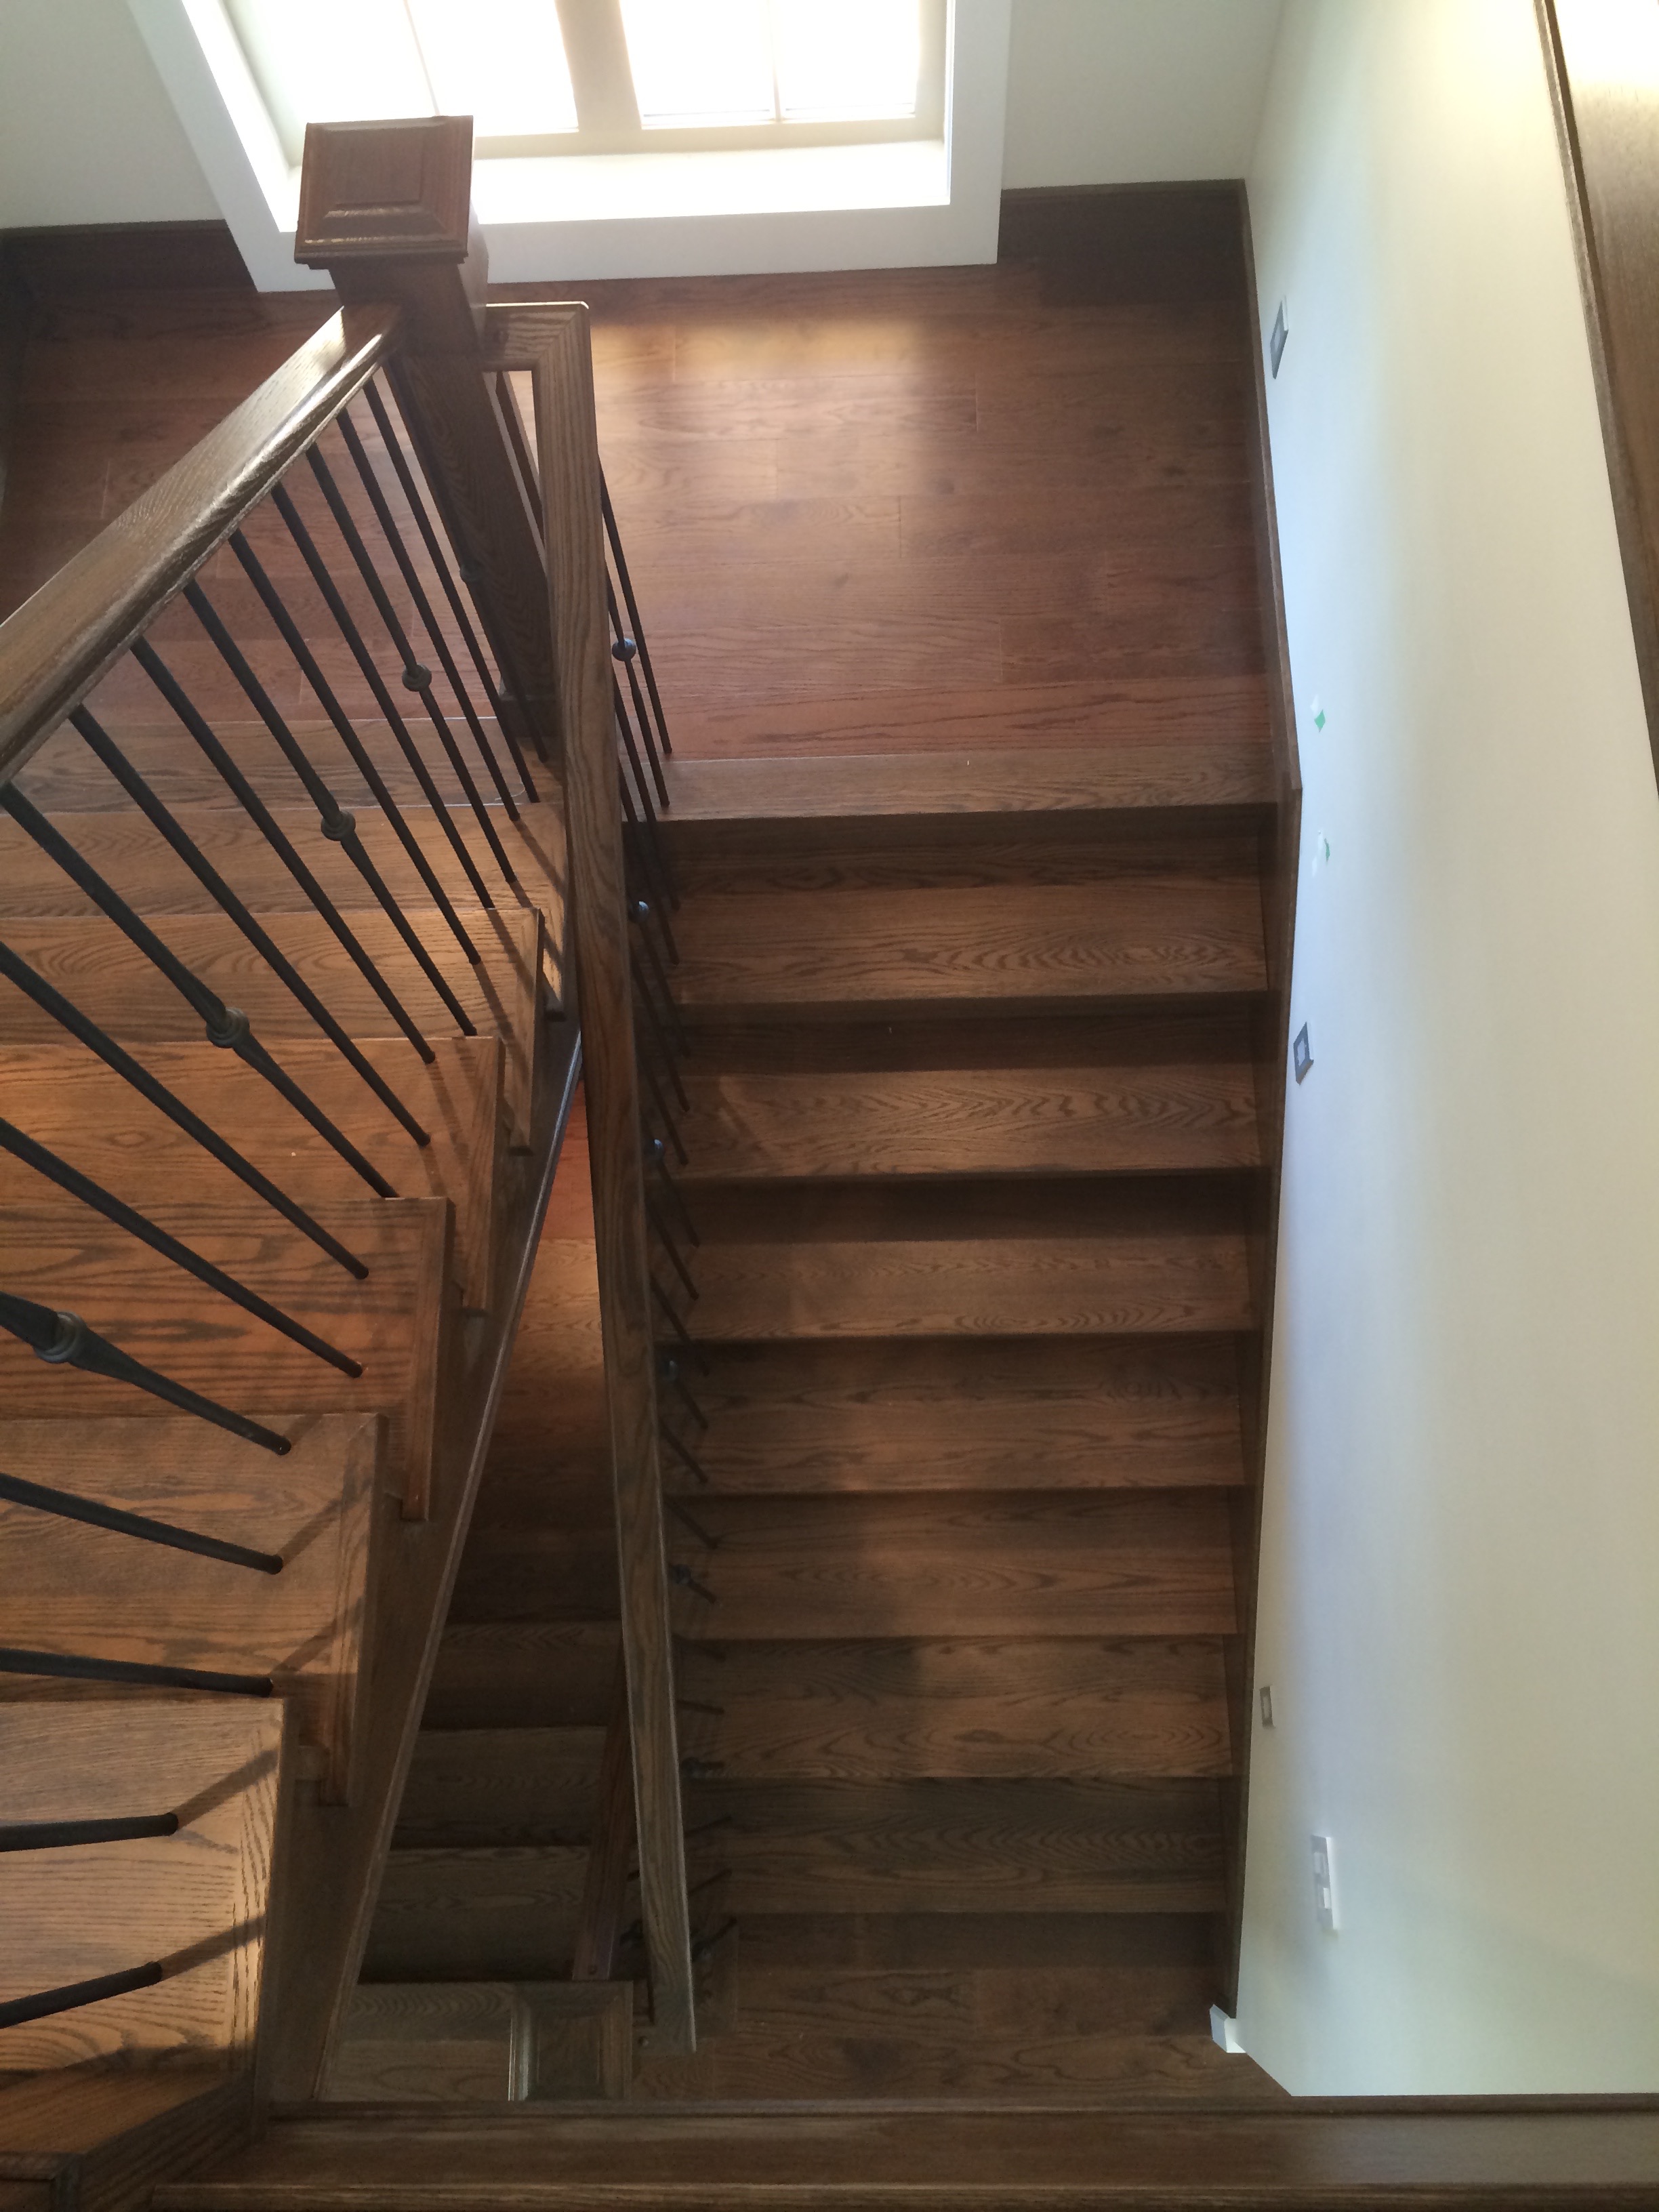 Stairs - Vancouver Stairs | Plytech Stairs Vancouver BC